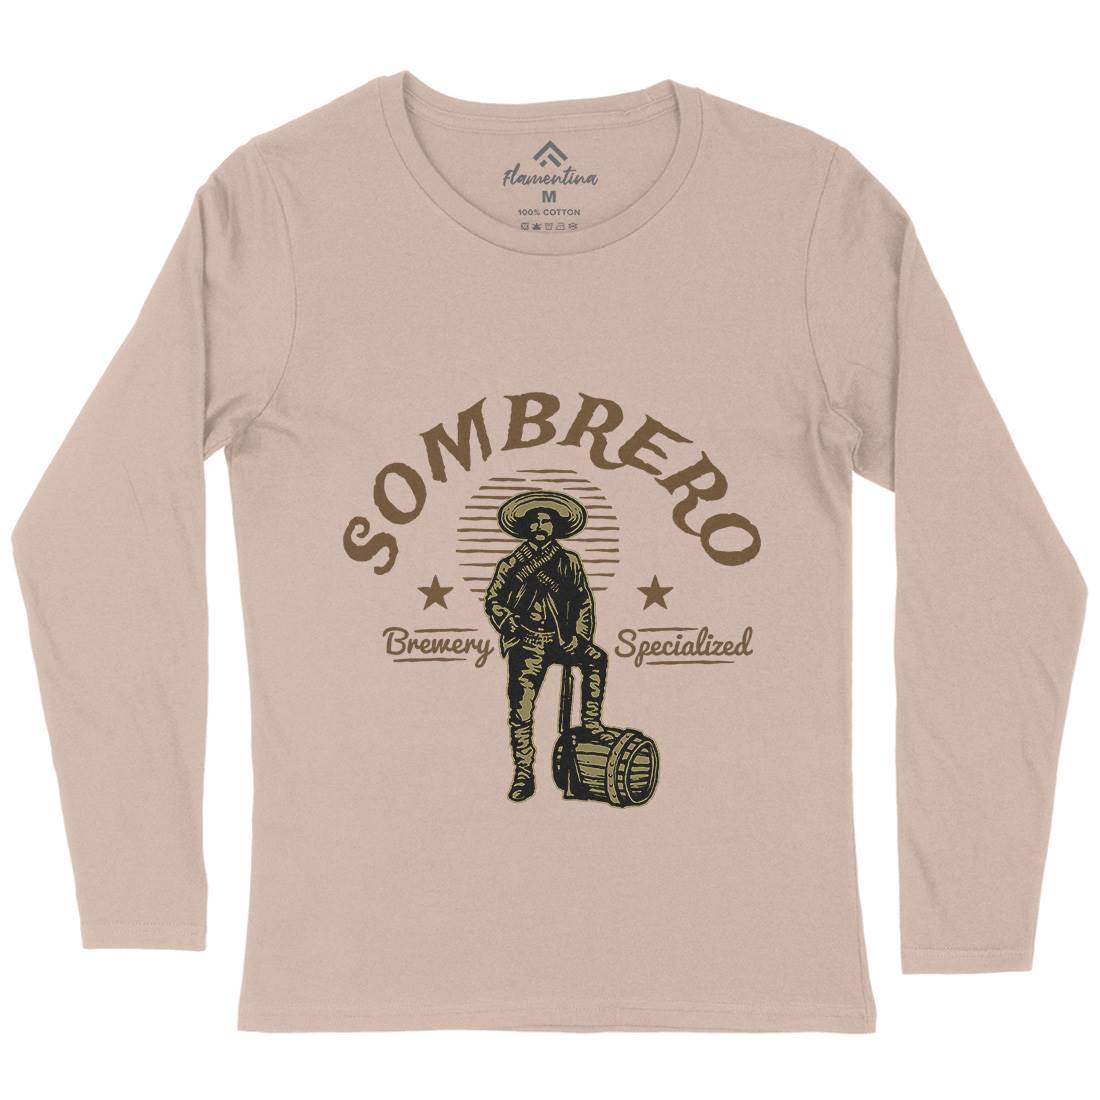 Sombrero Brewery Womens Long Sleeve T-Shirt American A369